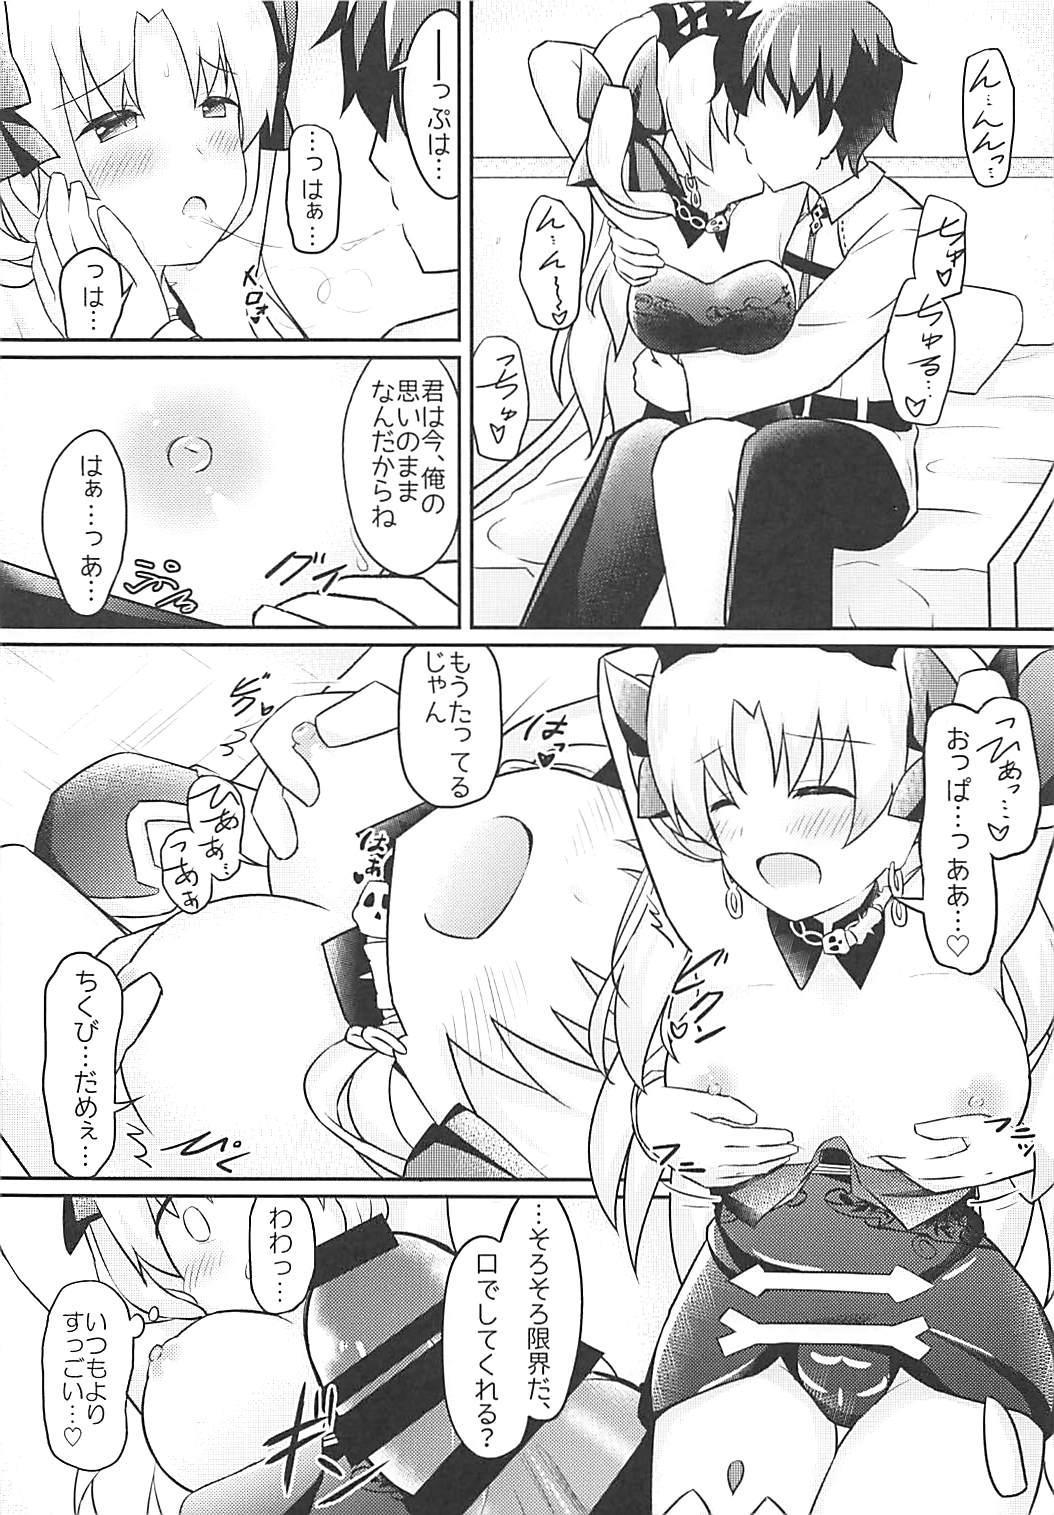 Grosso Do-M Megami no Ereshkigal - Fate grand order Gay Outinpublic - Page 5